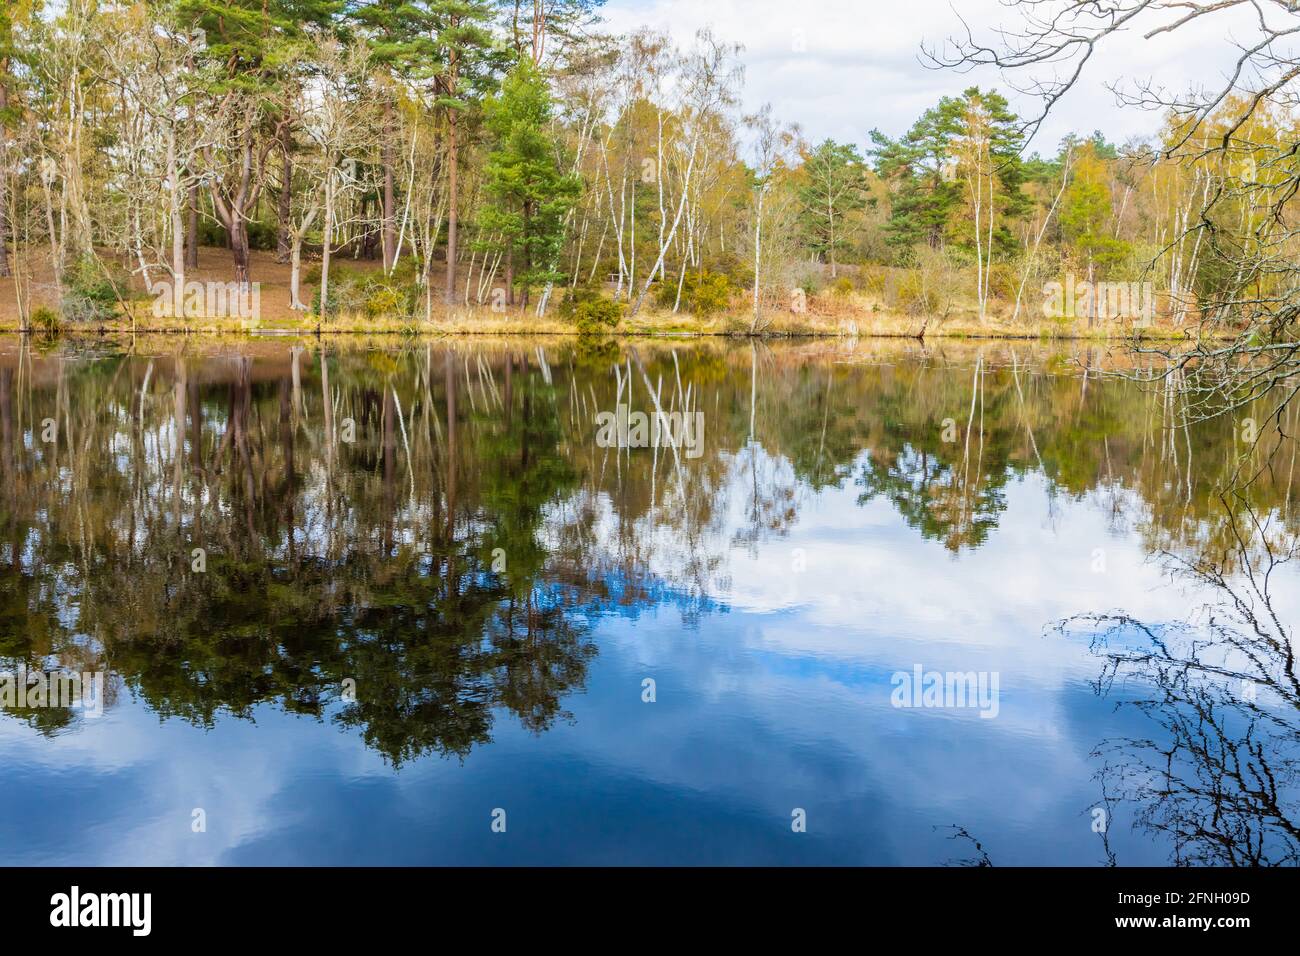 The Fishpool with reflections of lakeside trees in the Gracious Pond area of Chobham Common, near Woking, Surrey, south-east England, in spring Stock Photo